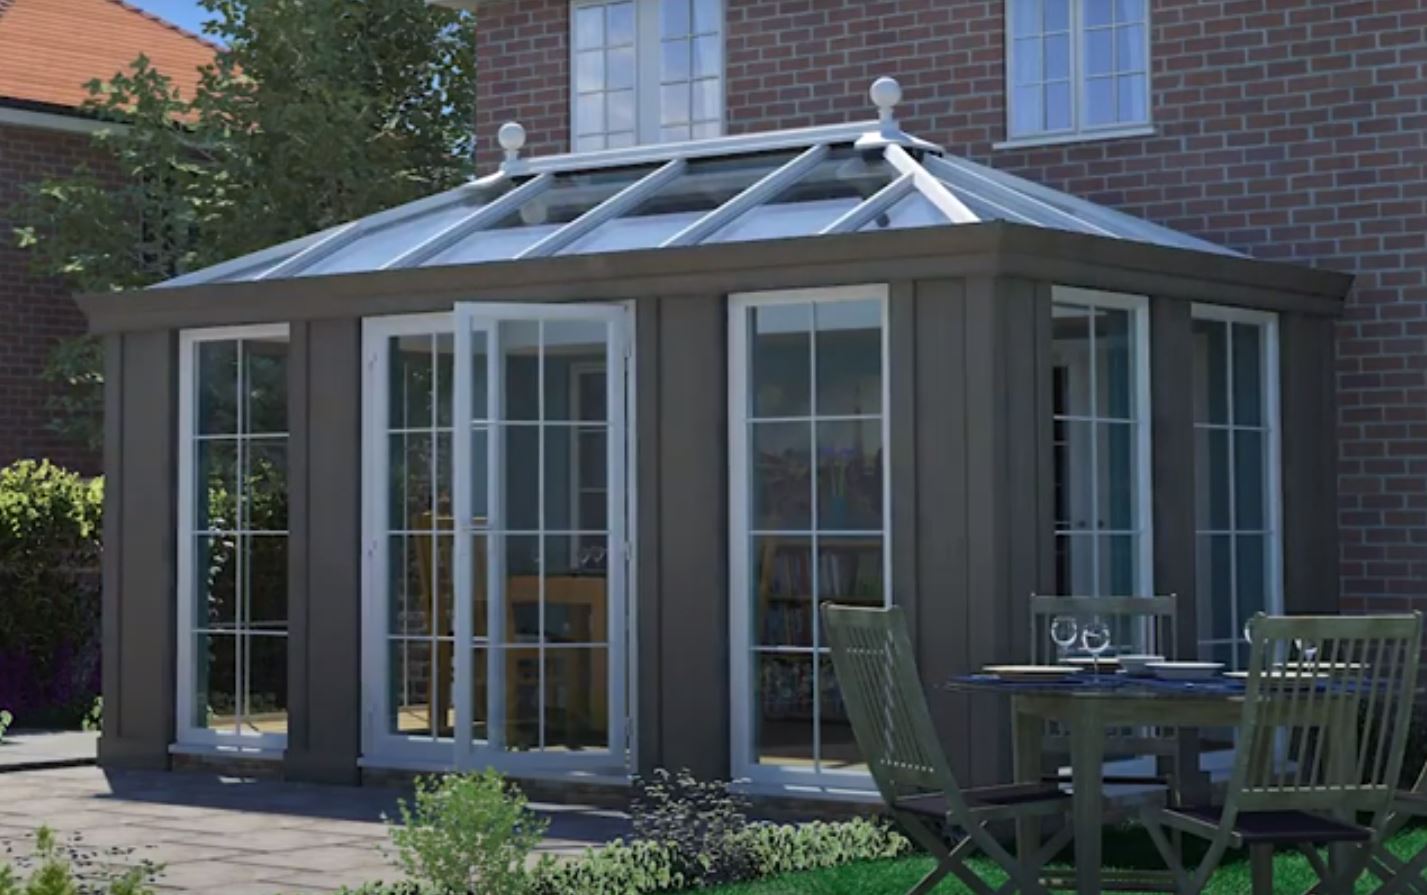 Ultraframe's extension solutions